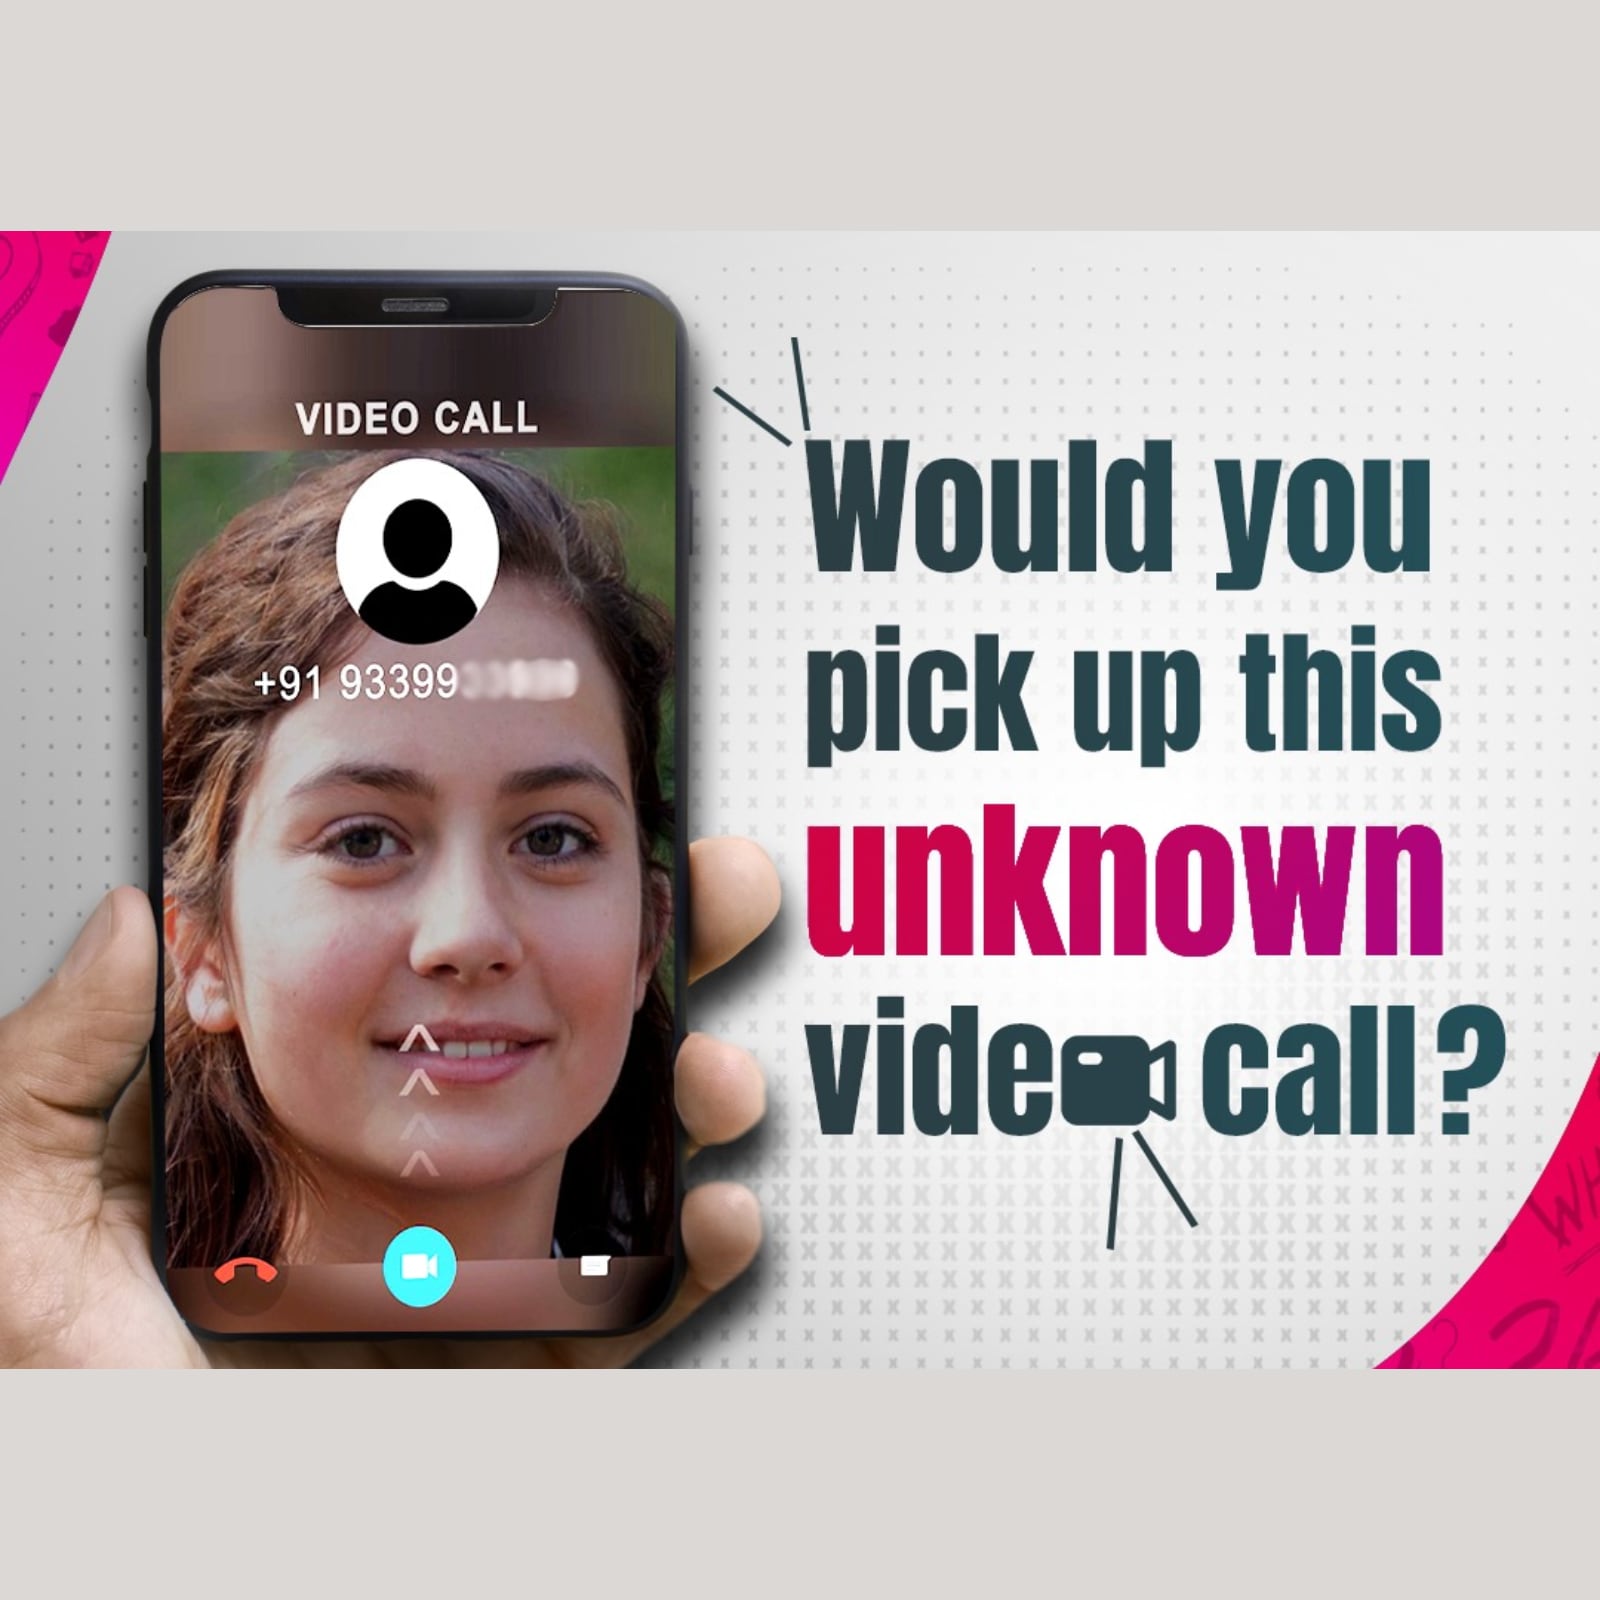 Blackmail Naked Webcam Chat - Online Scam That Takes Place On Video Call: Here's How It Works And How To  Stay Safe